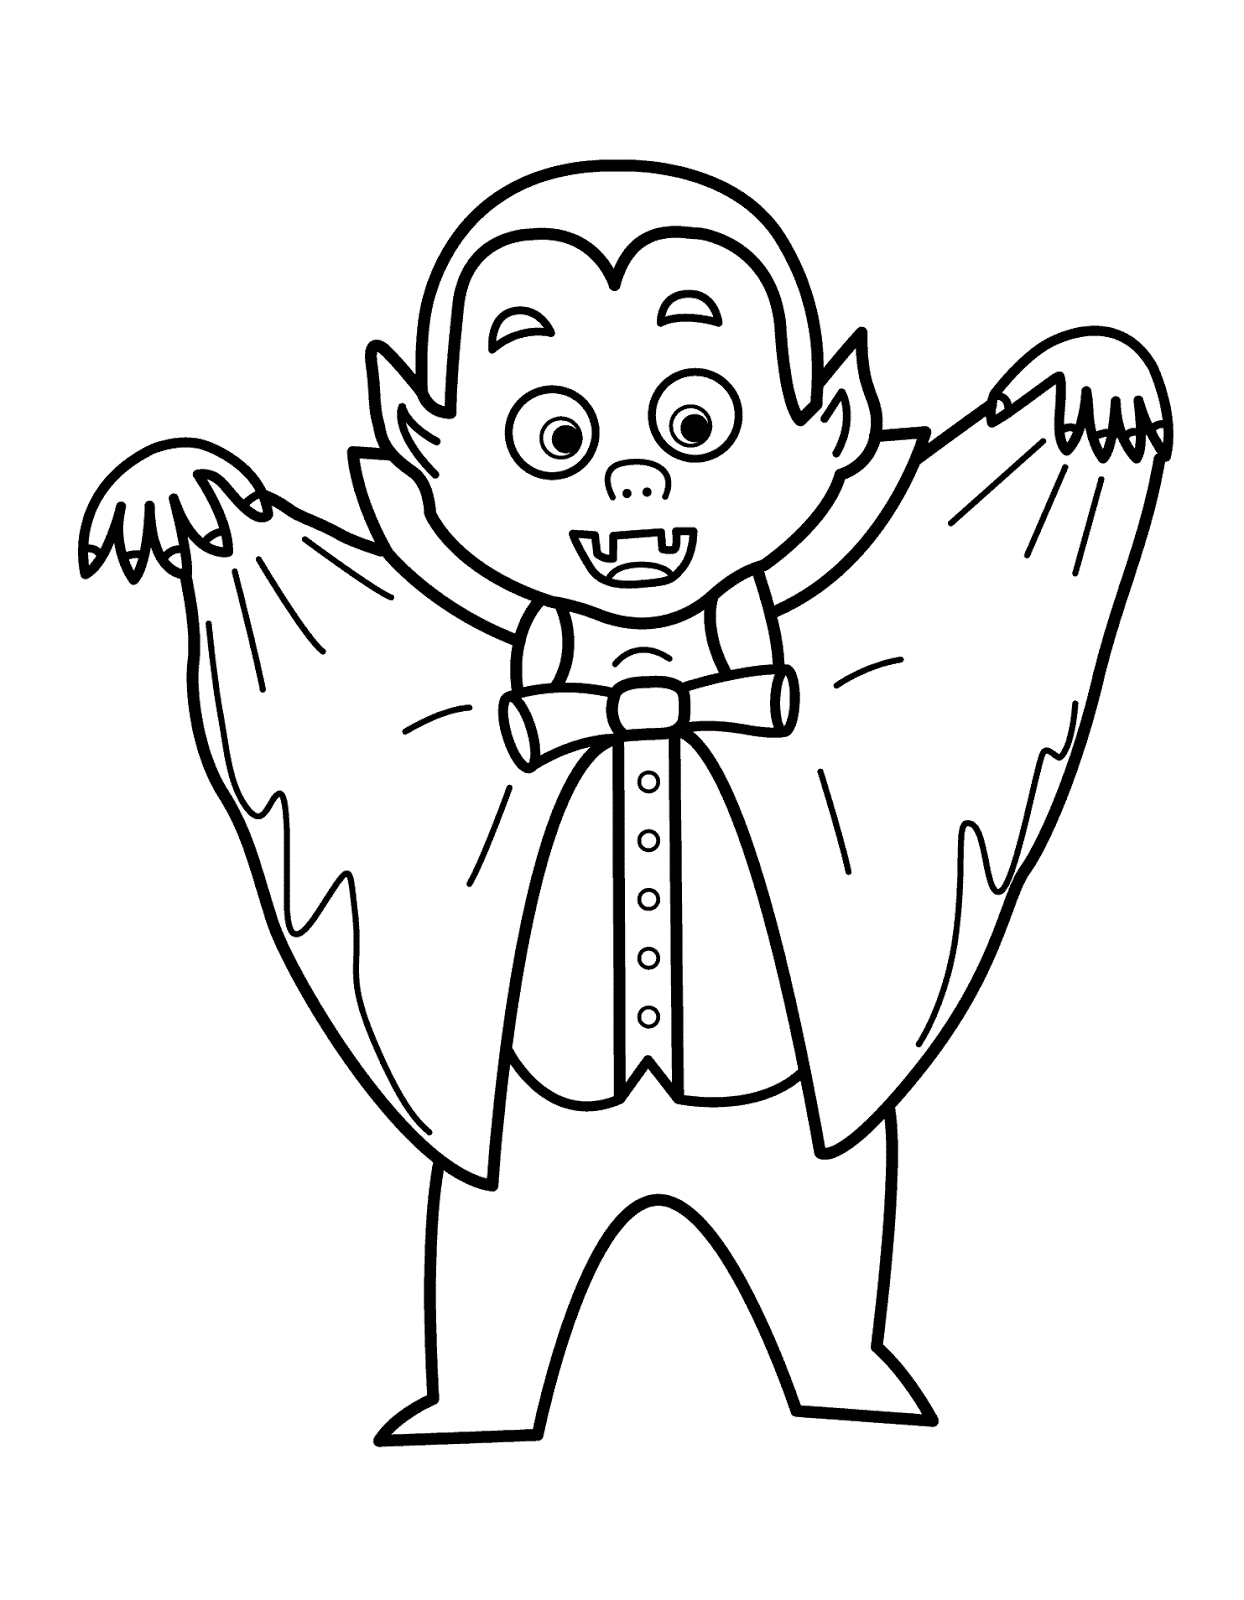 Vampire outline cliparts.